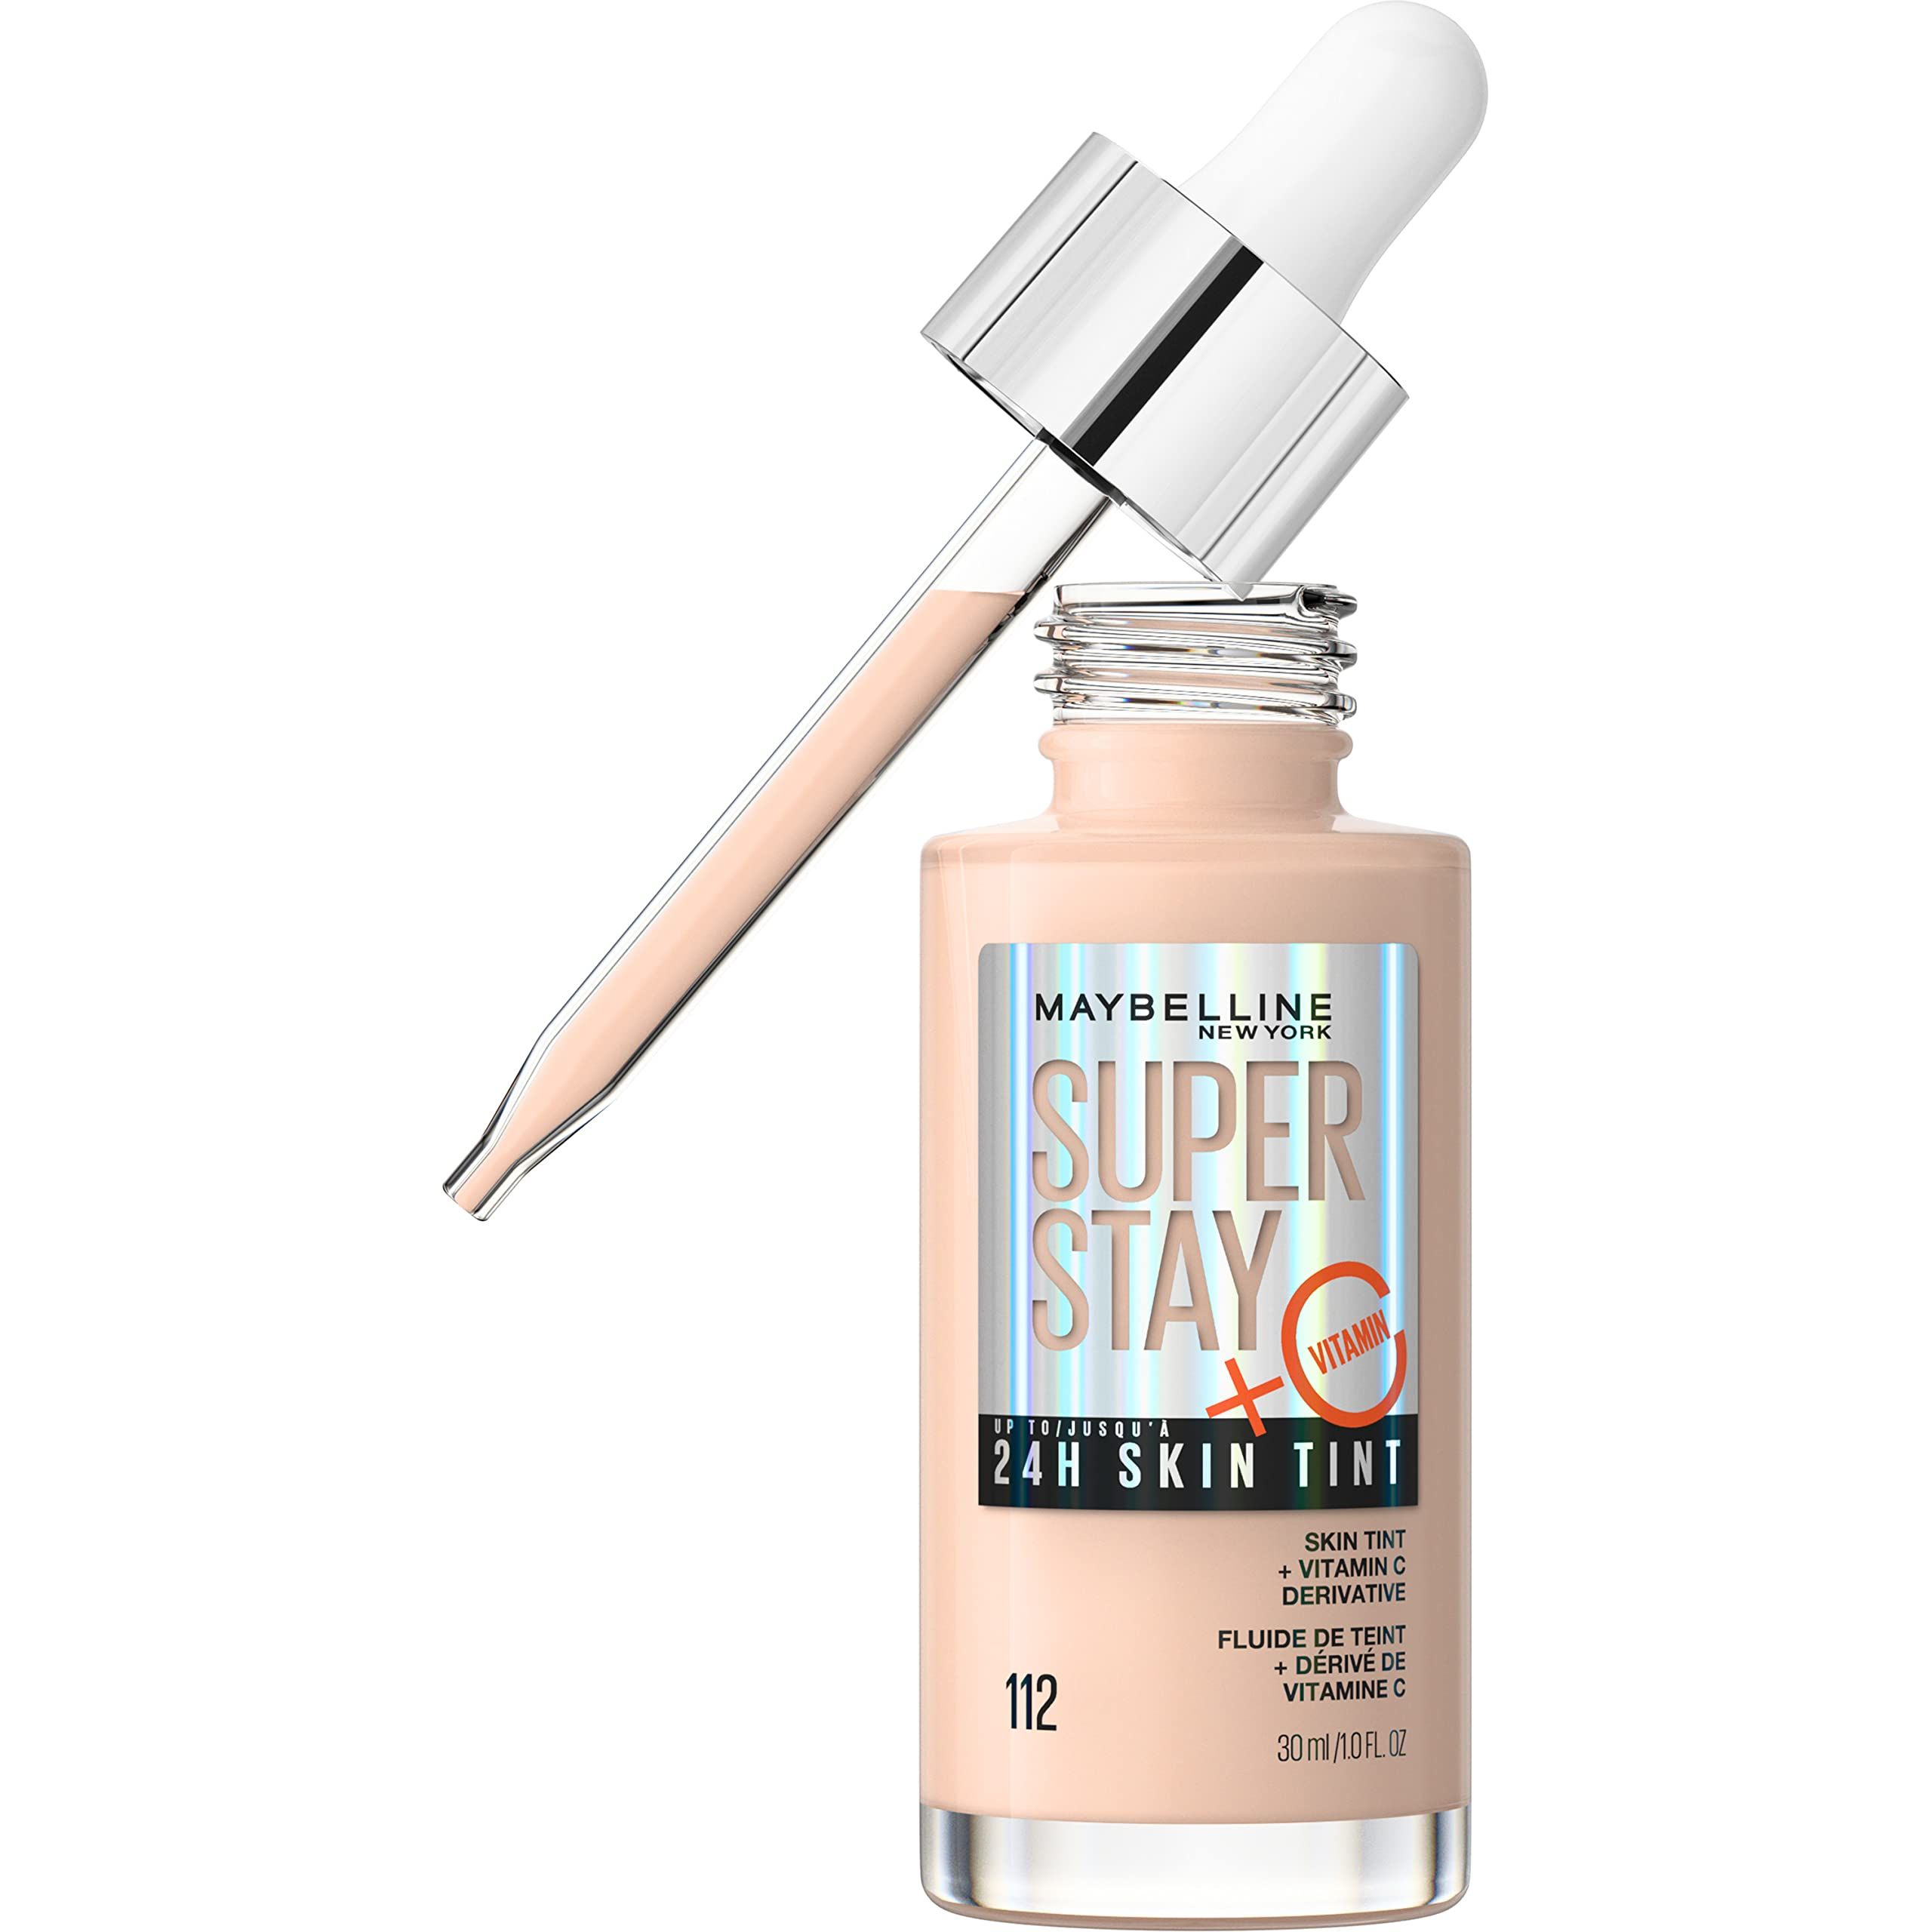 Maybelline Super Stay Up to 24HR Skin Tint, Radiant Light-to-Medium Coverage Foundation, Makeup I... | Amazon (US)